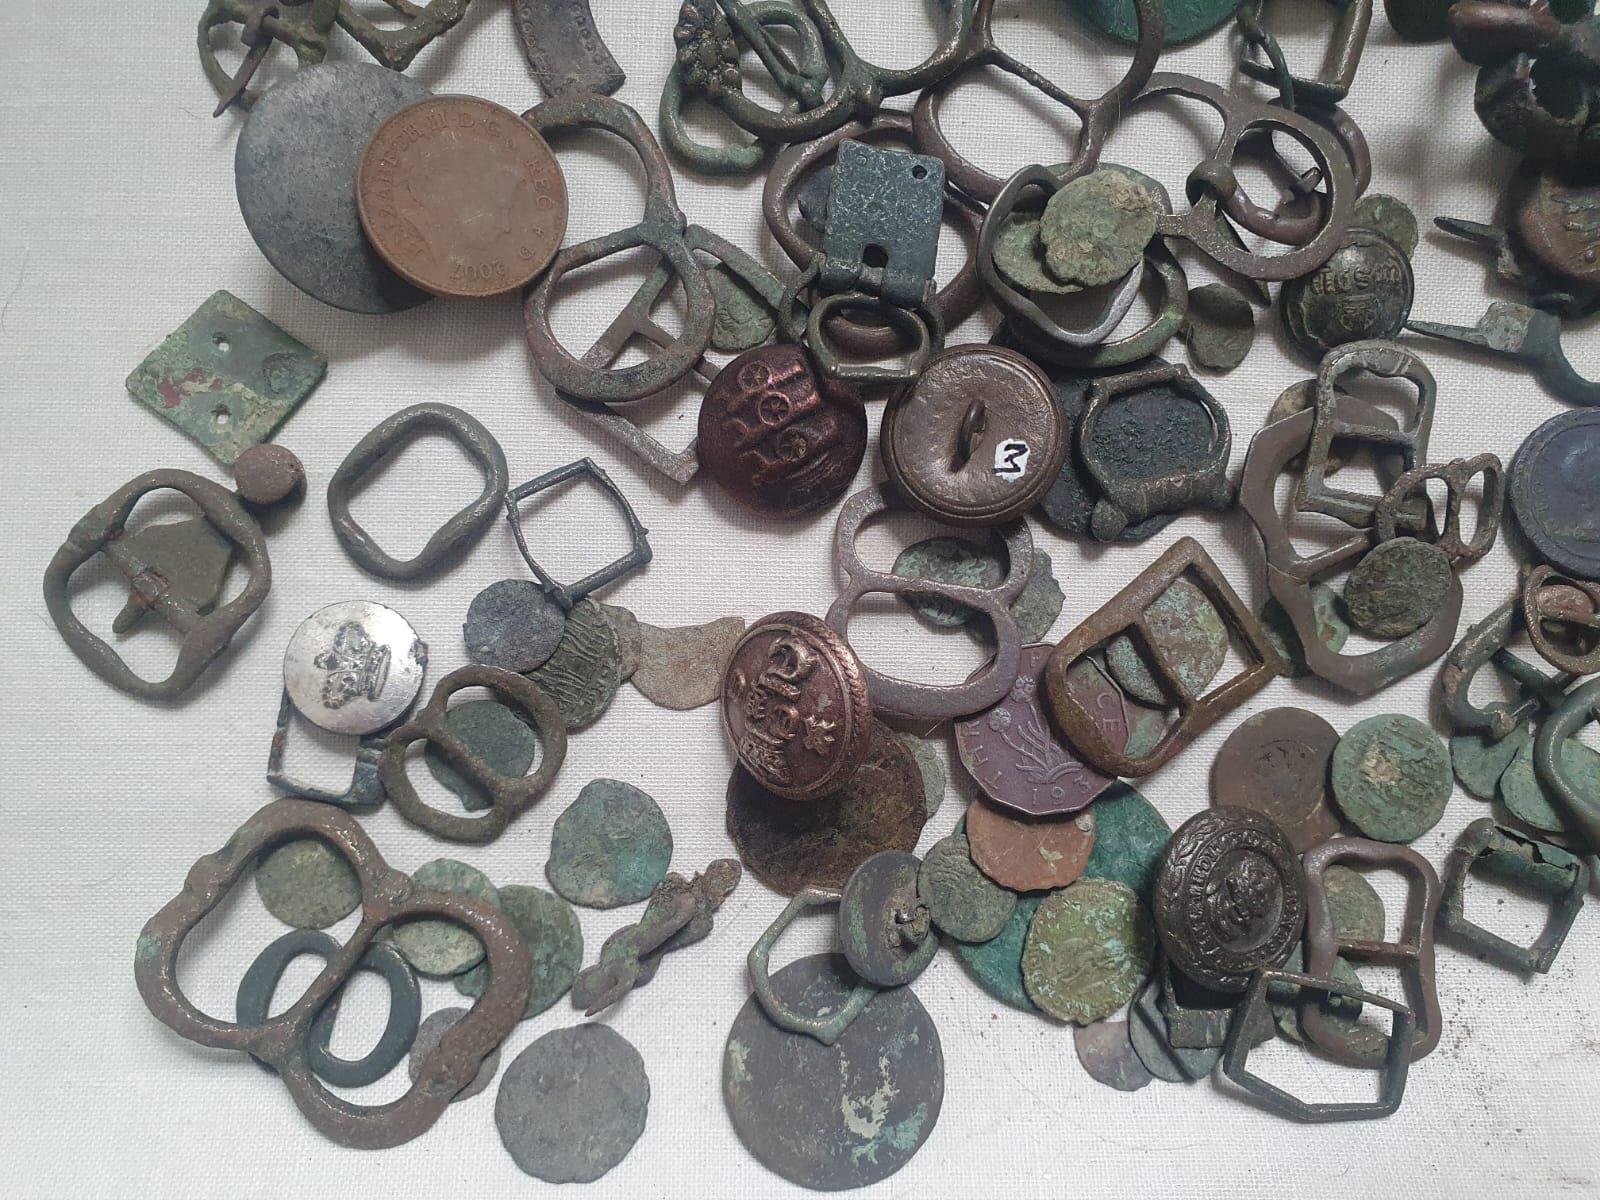 A collection of excavated artefacts including a Saxon and medieval buckles, Roman coins and other - Image 4 of 5